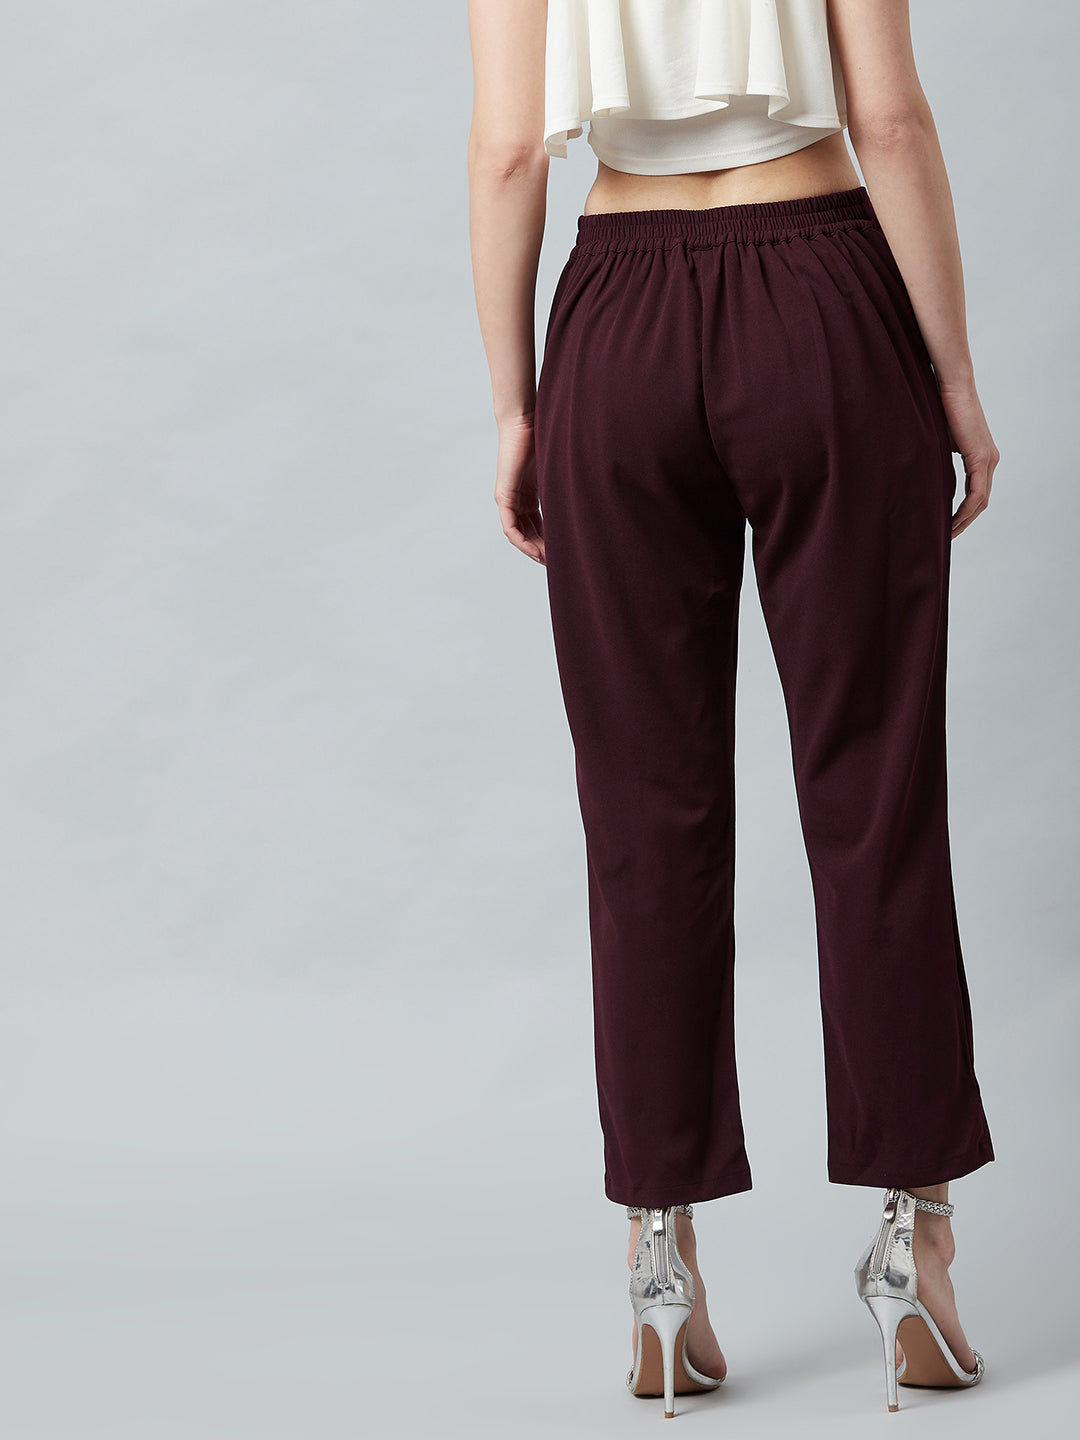 Athena Women Burgundy Regular Fit Solid Formal Trousers - Athena Lifestyle